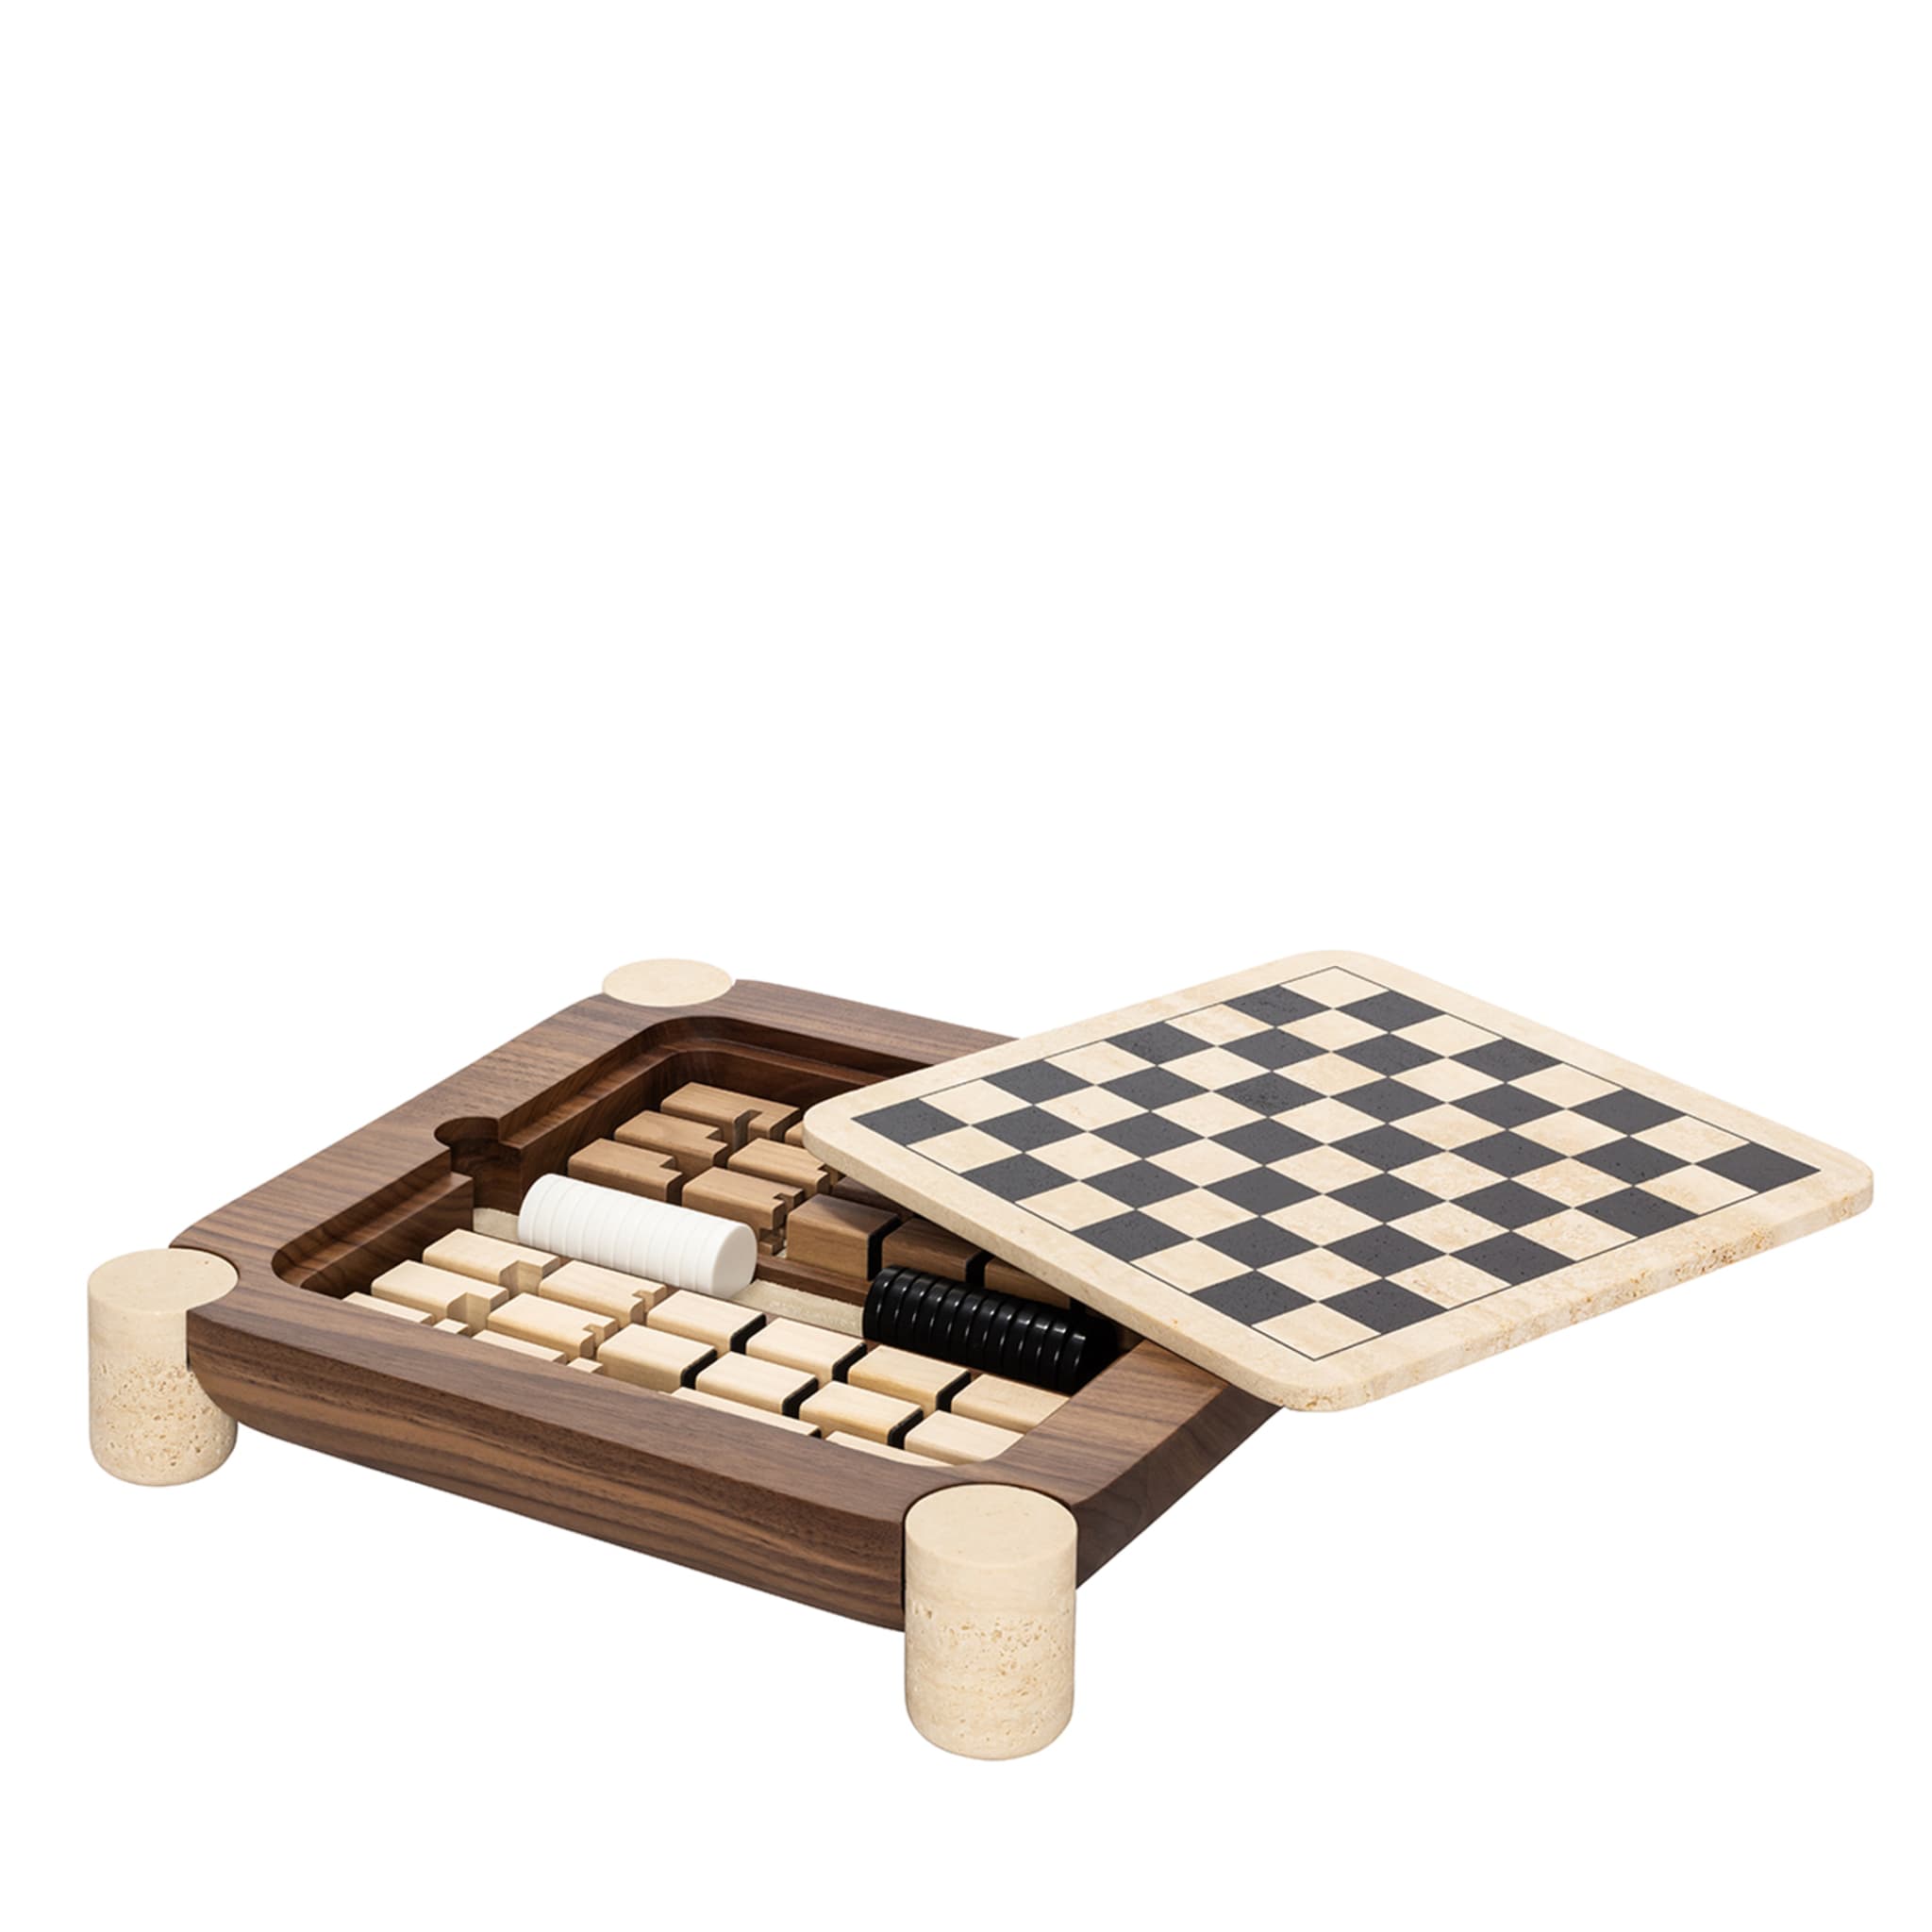 Mocambo Chess Draughts Game Set Design by Simone Fanciullacci - Alternative view 3